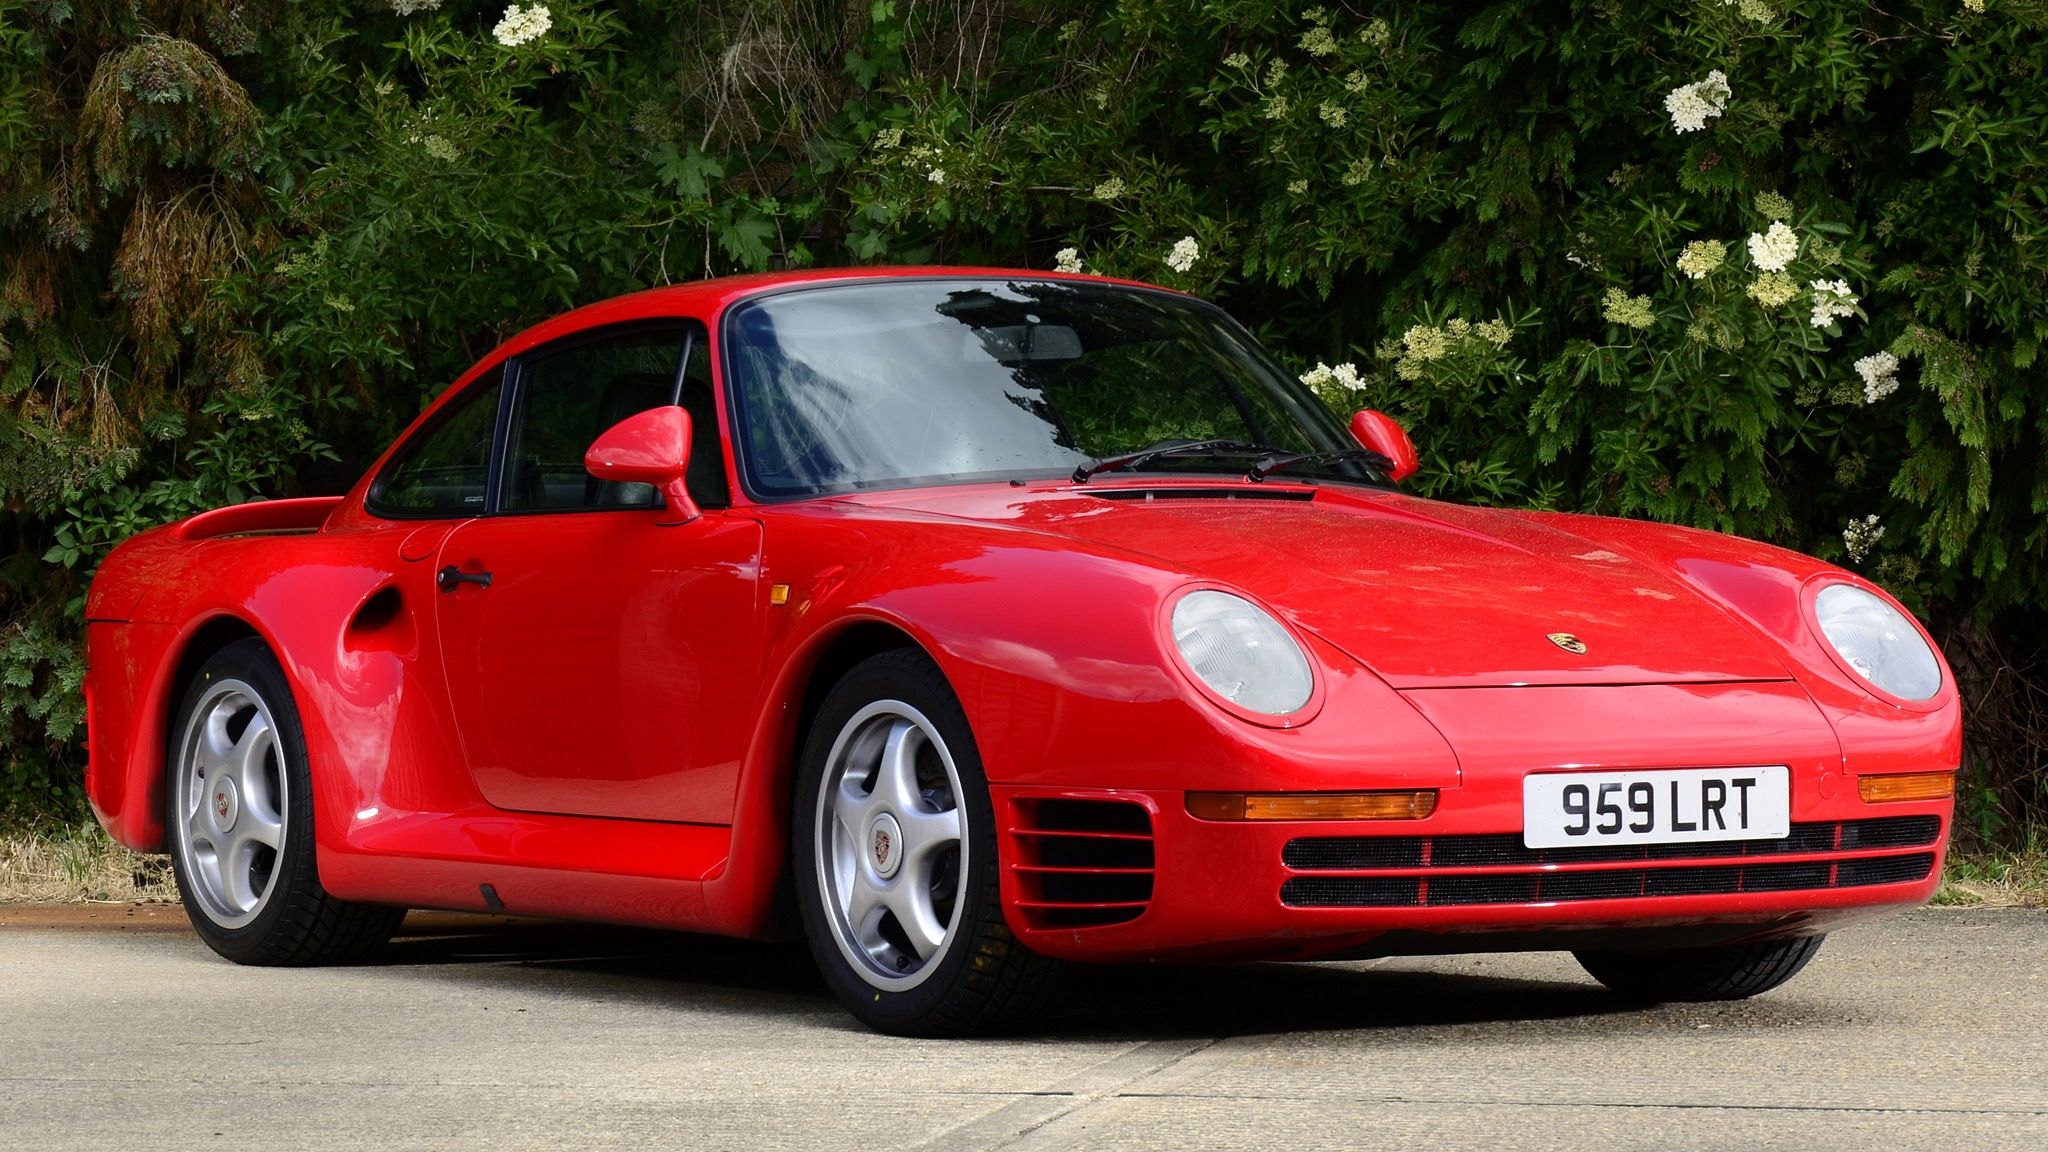  The Porsche 959 was an icon o fits time; it was luxurious, sexy and downright fast. It is arguably responsible for the awesome supercars that we see today. 